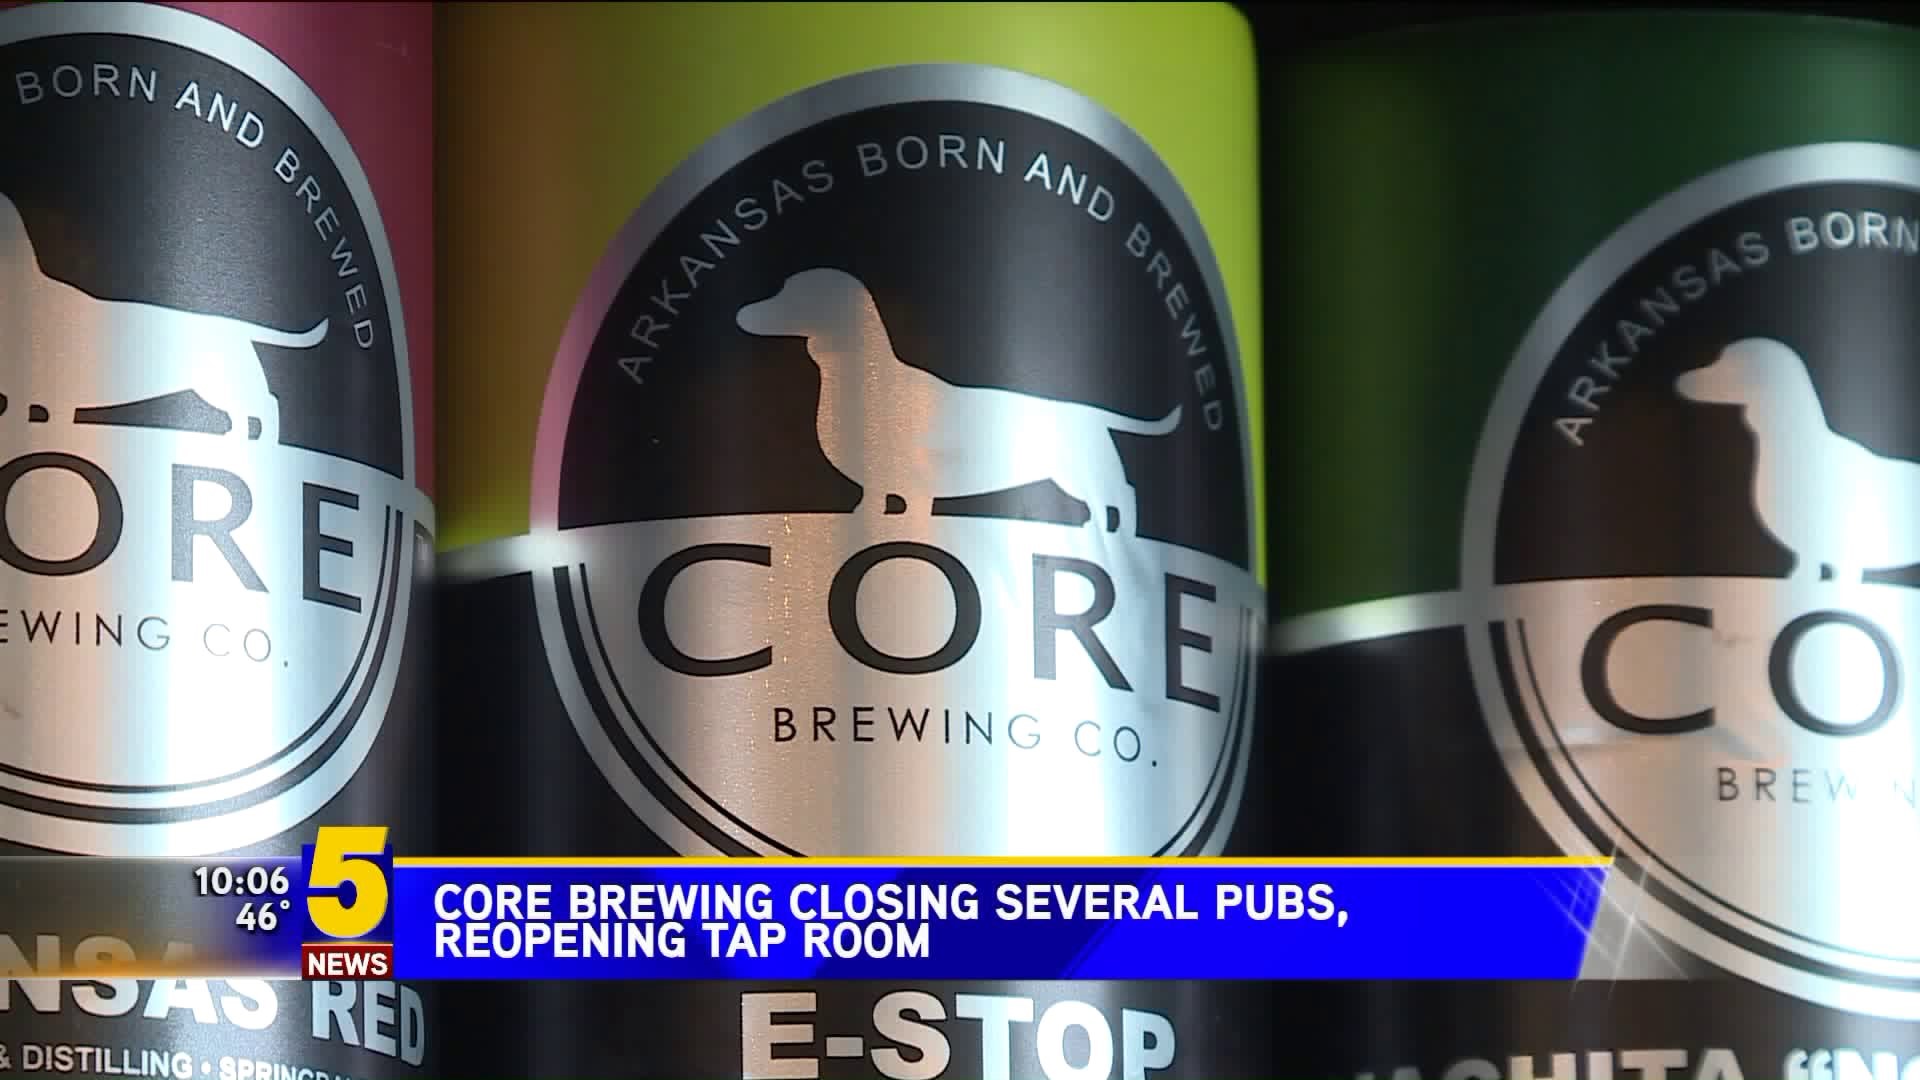 Core Brewing Closes Several Pubs, Reopening Tap Room